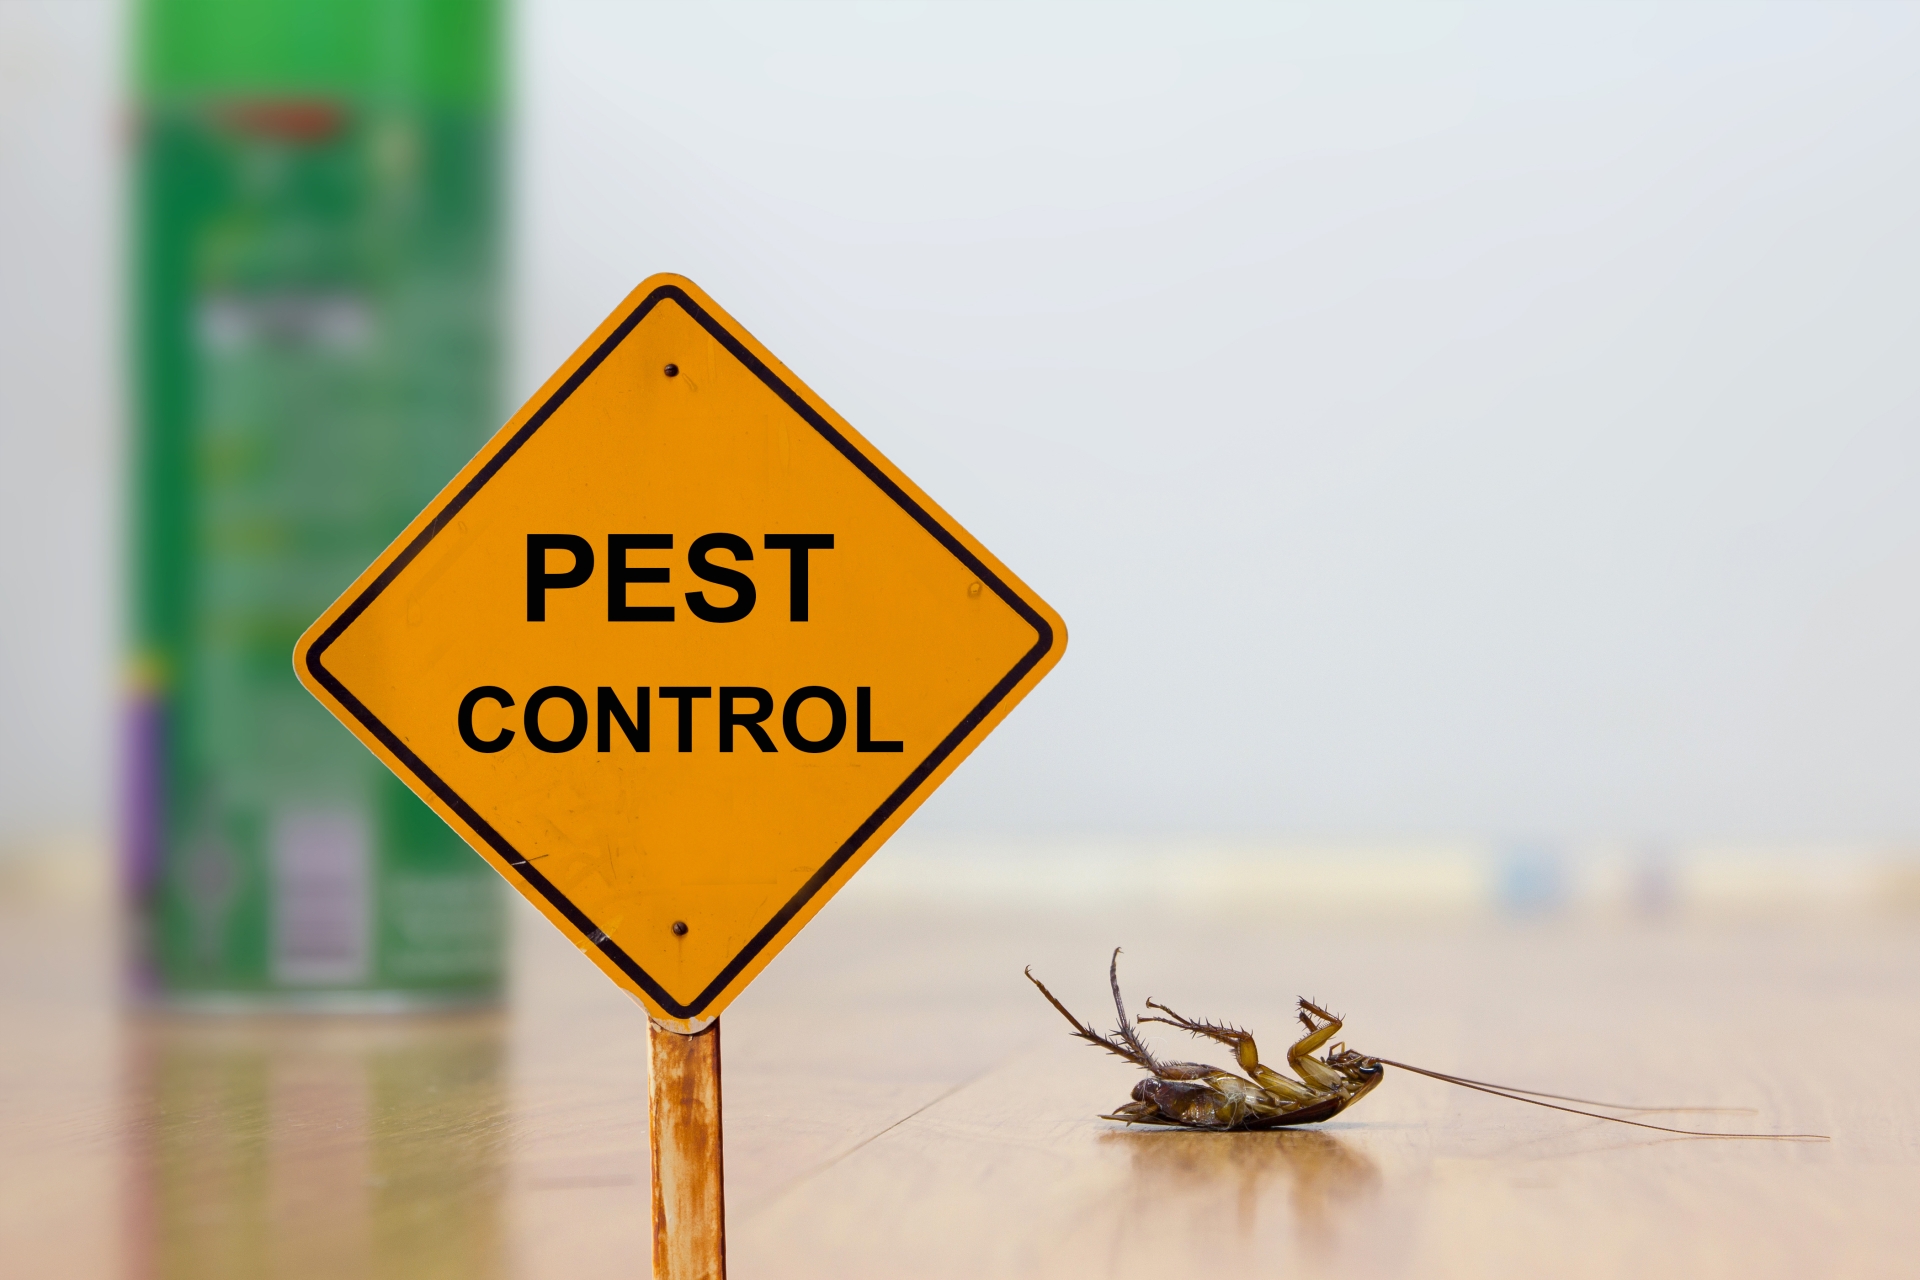 24 Hour Pest Control, Pest Control in West Byfleet, Byfleet, KT14. Call Now 020 8166 9746